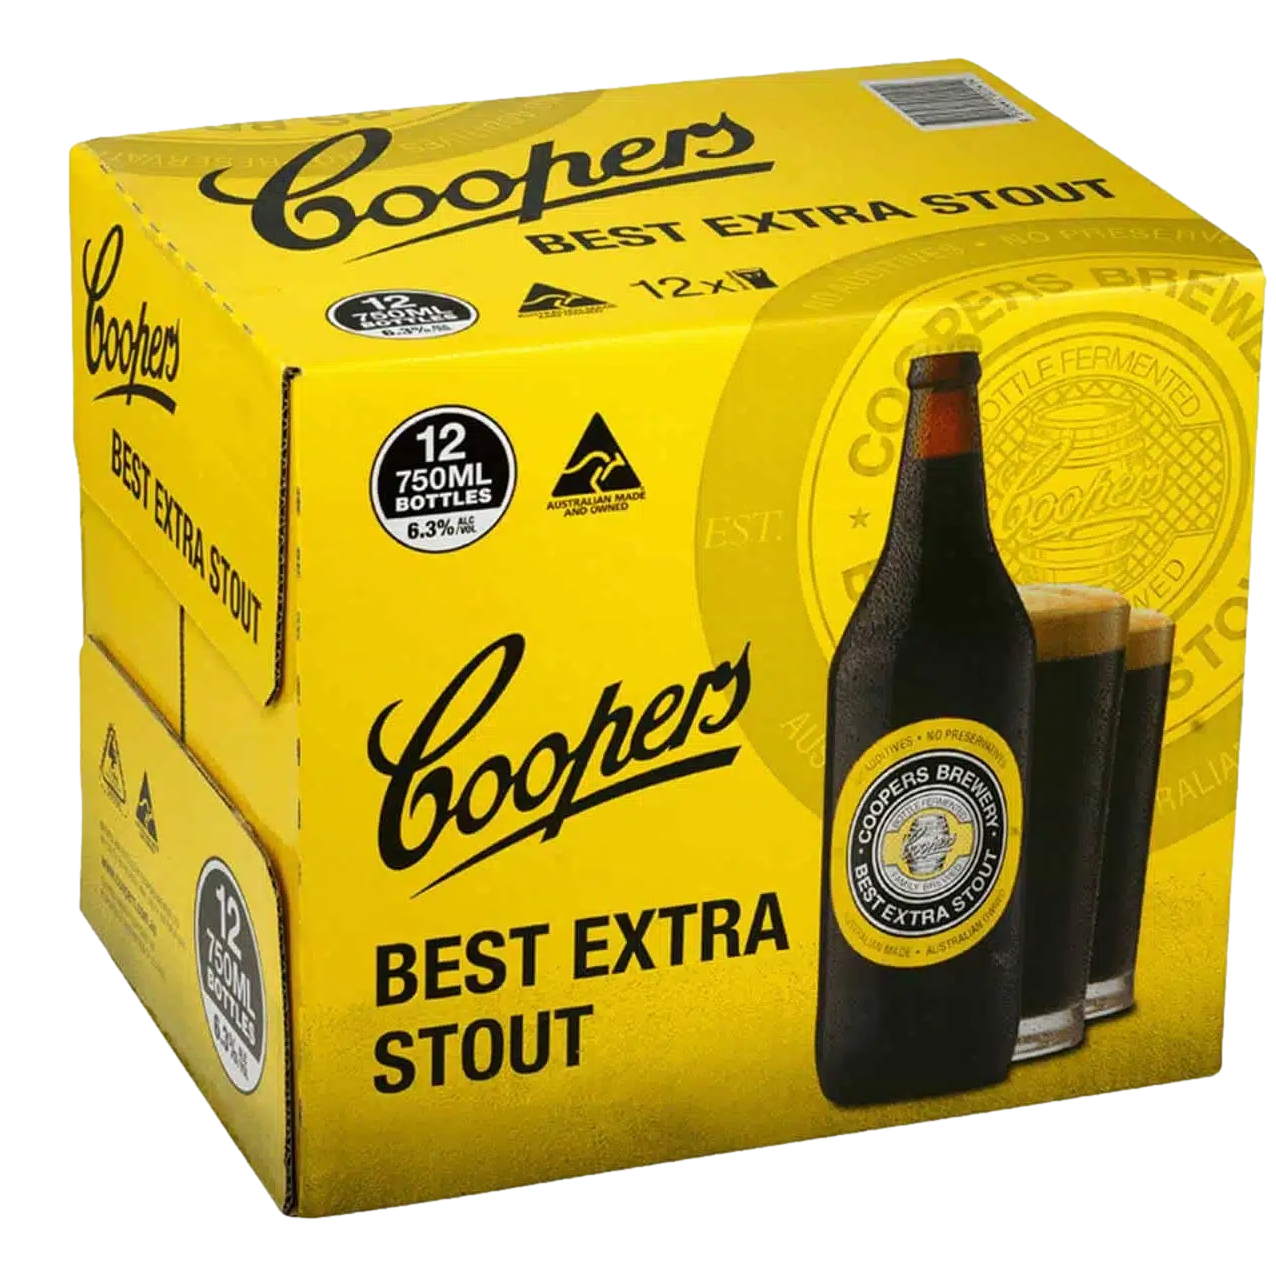 Coopers Extra Stout 750ml Bottle Case of 12